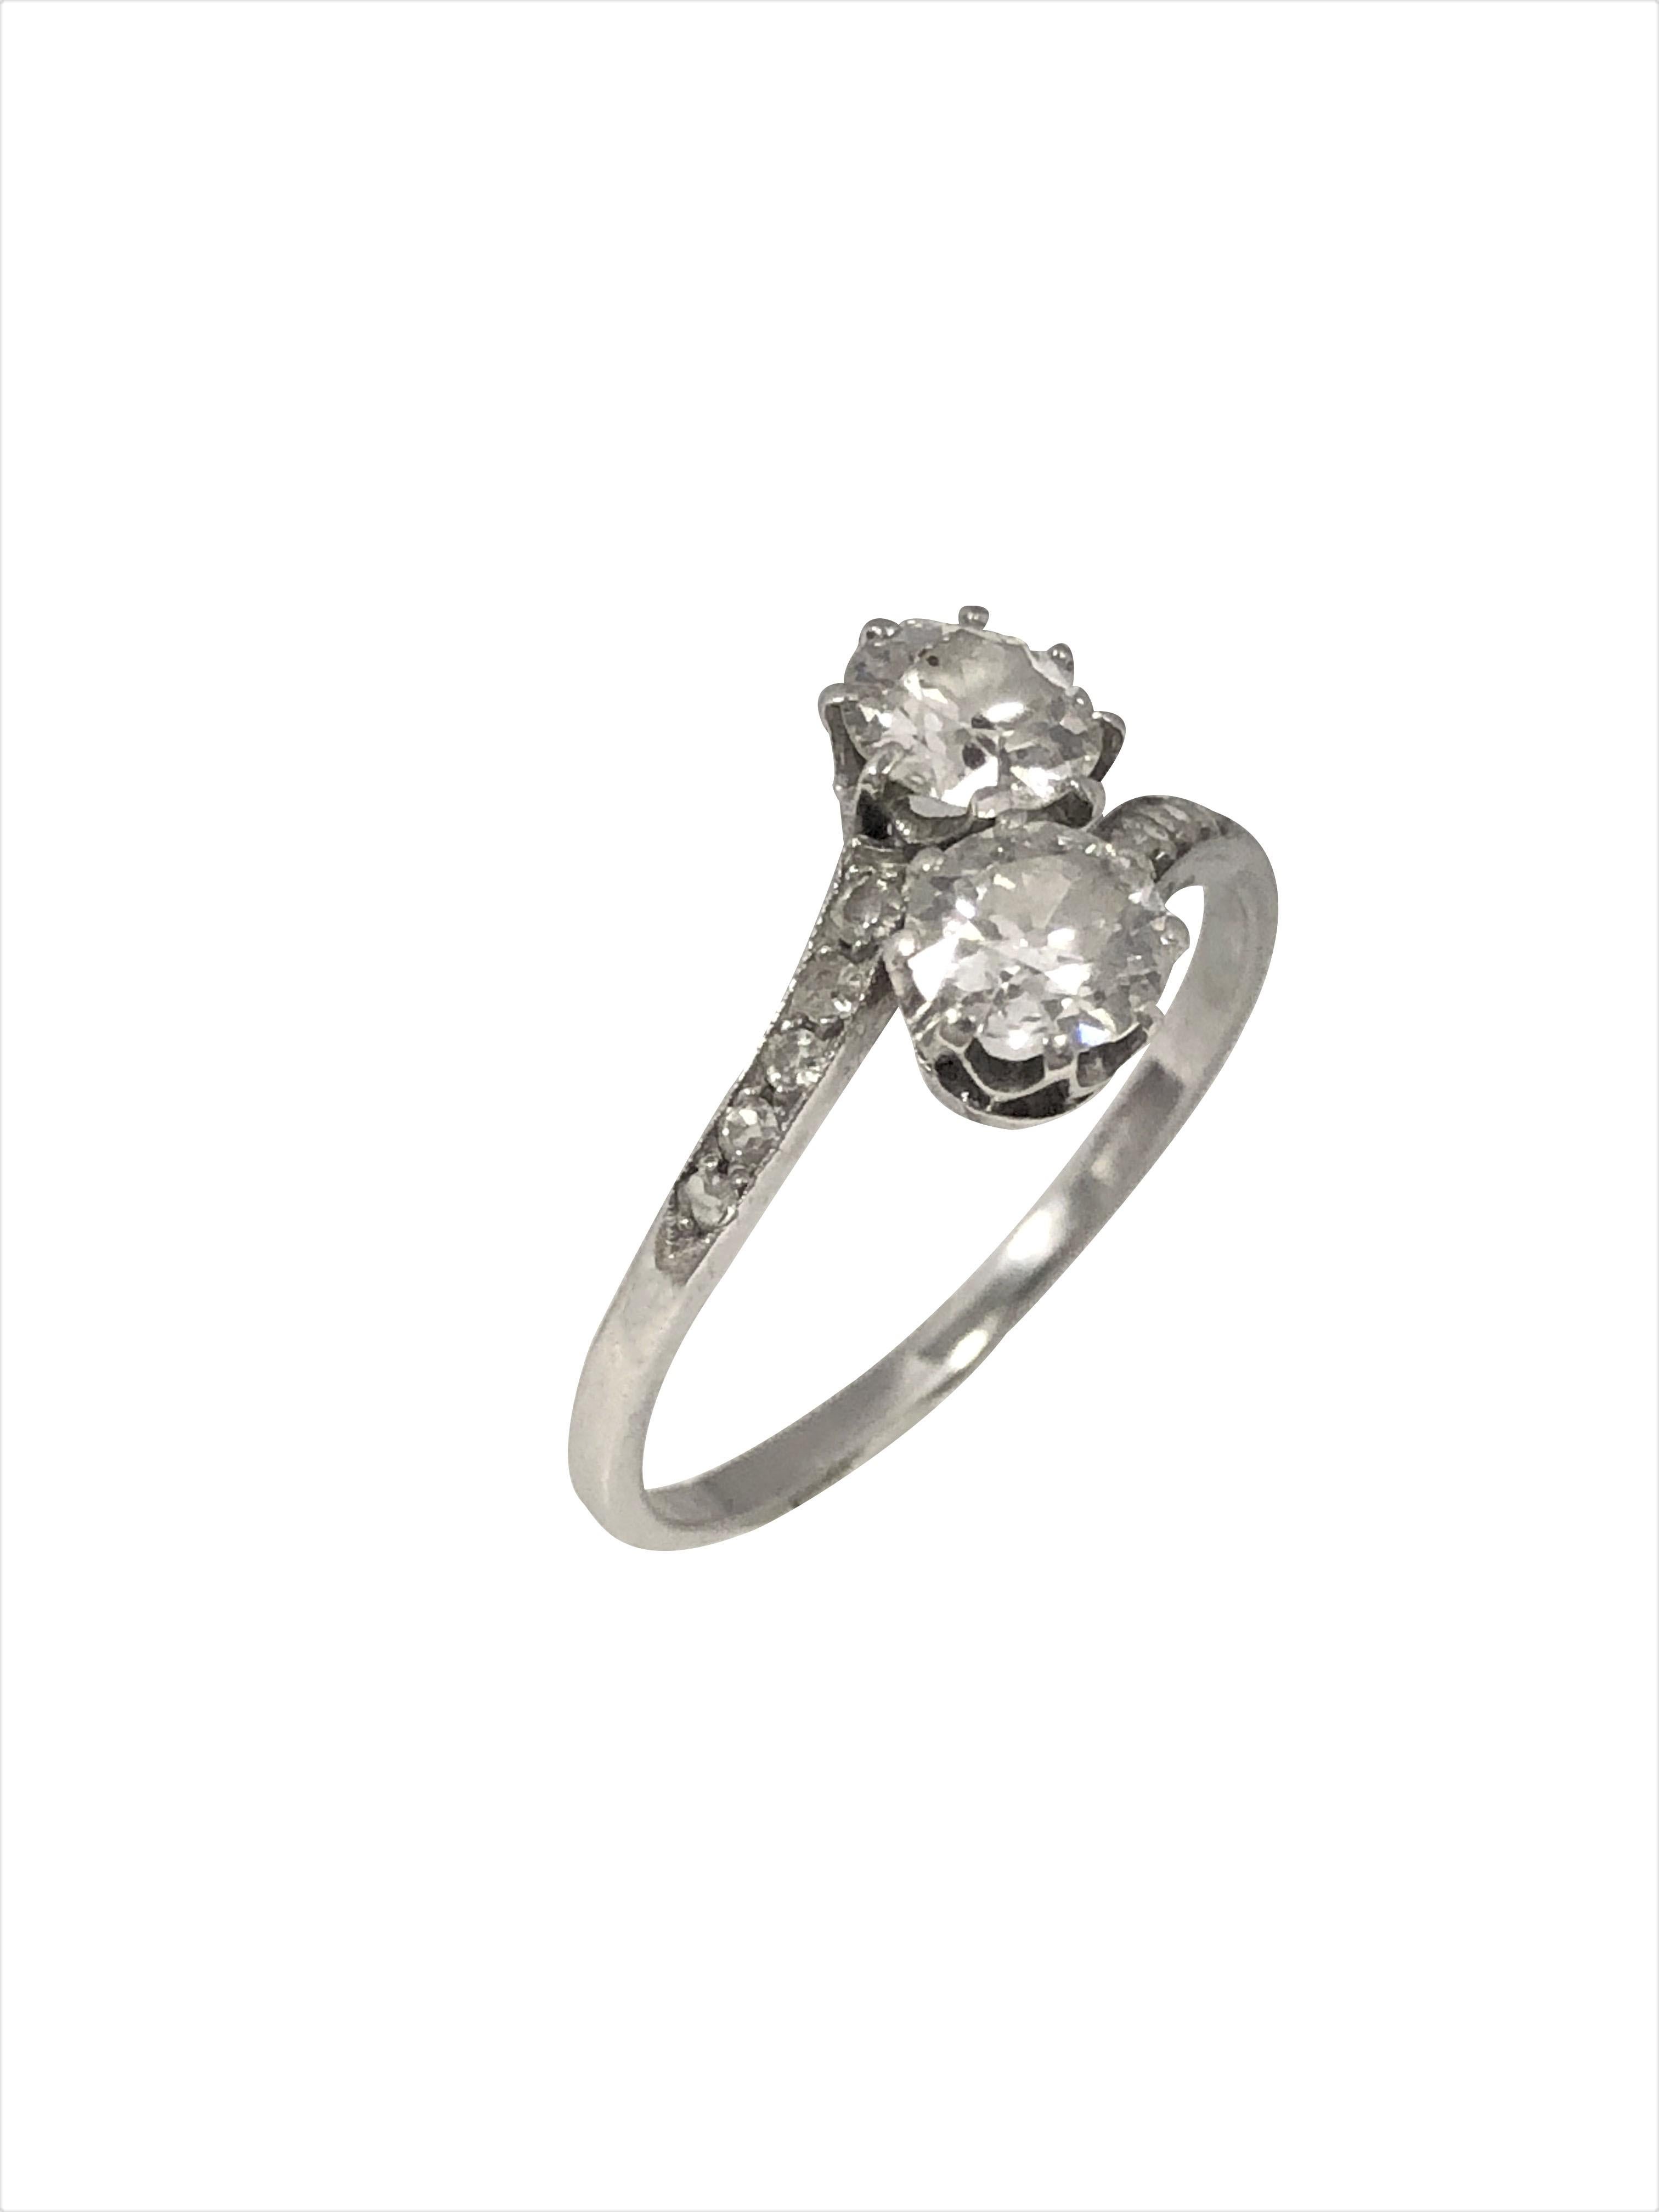 Old Mine Cut Antique Platinum and Diamond Ladies Bypass Ring